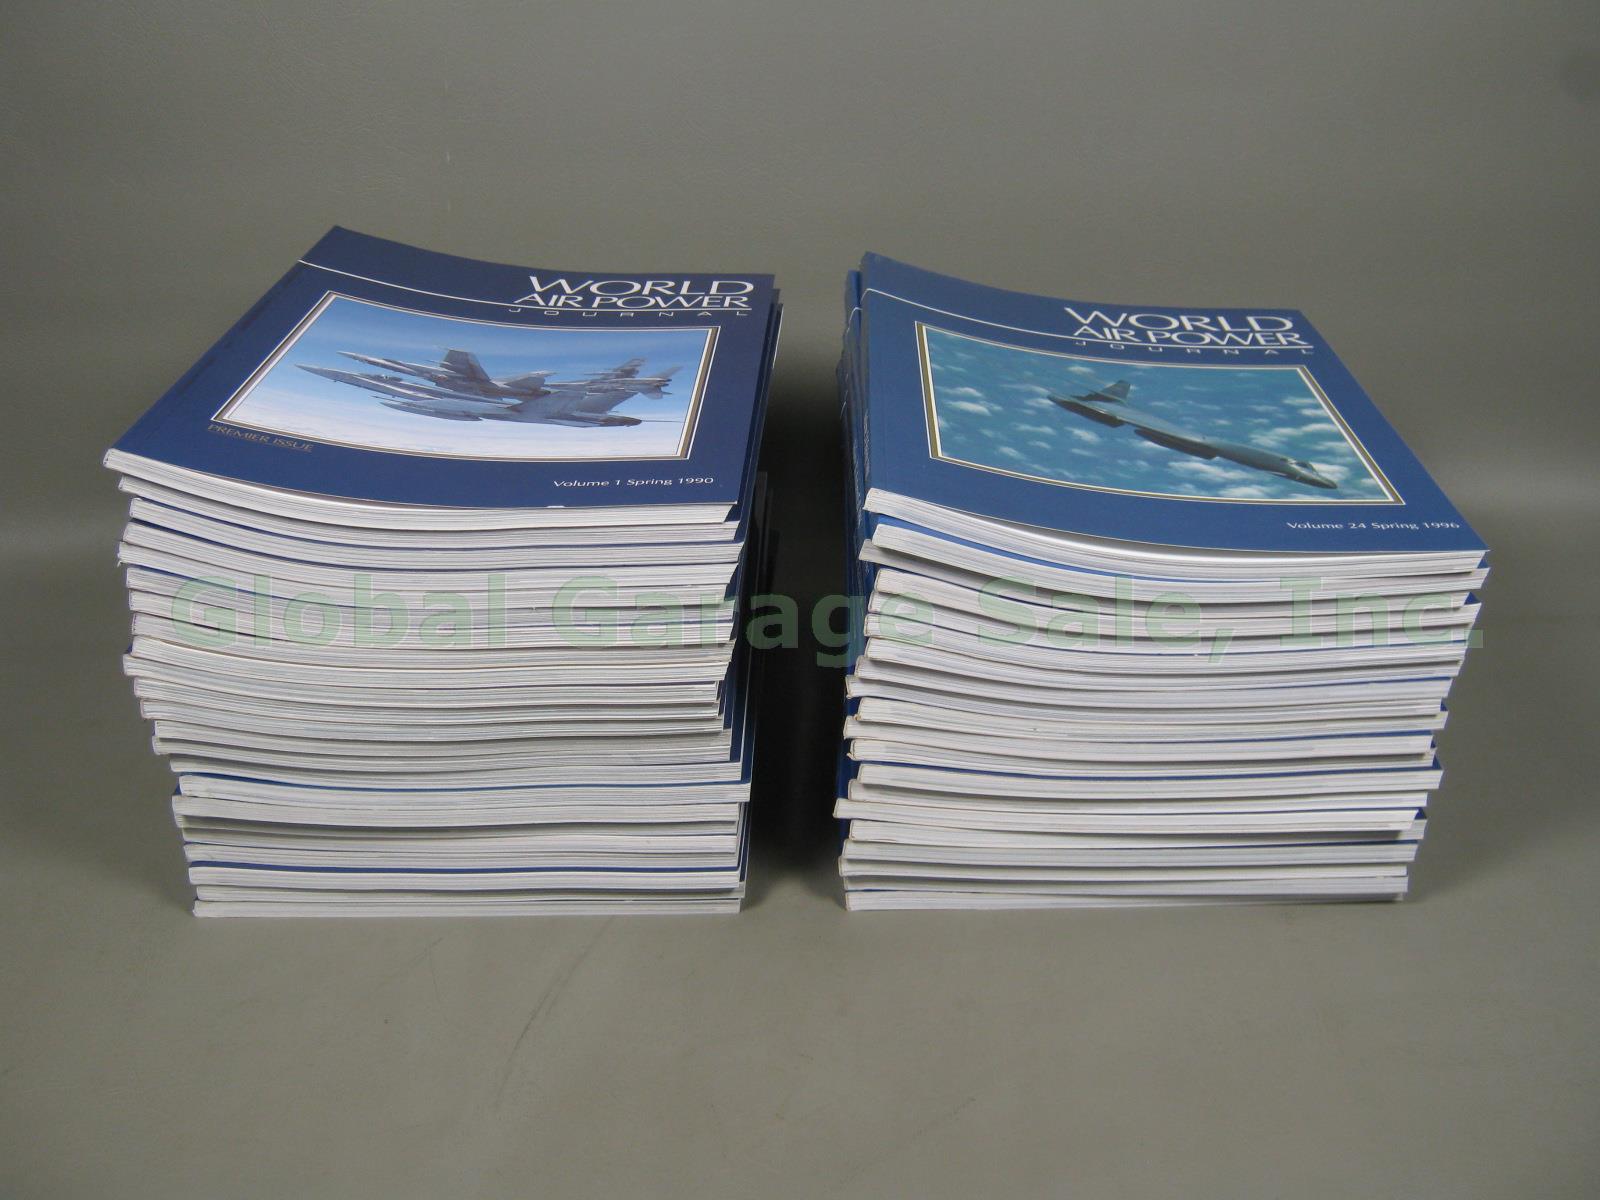 Complete 43 Volume Set World Air Power Journal Collection Lot +Indexes 1990-2000 3